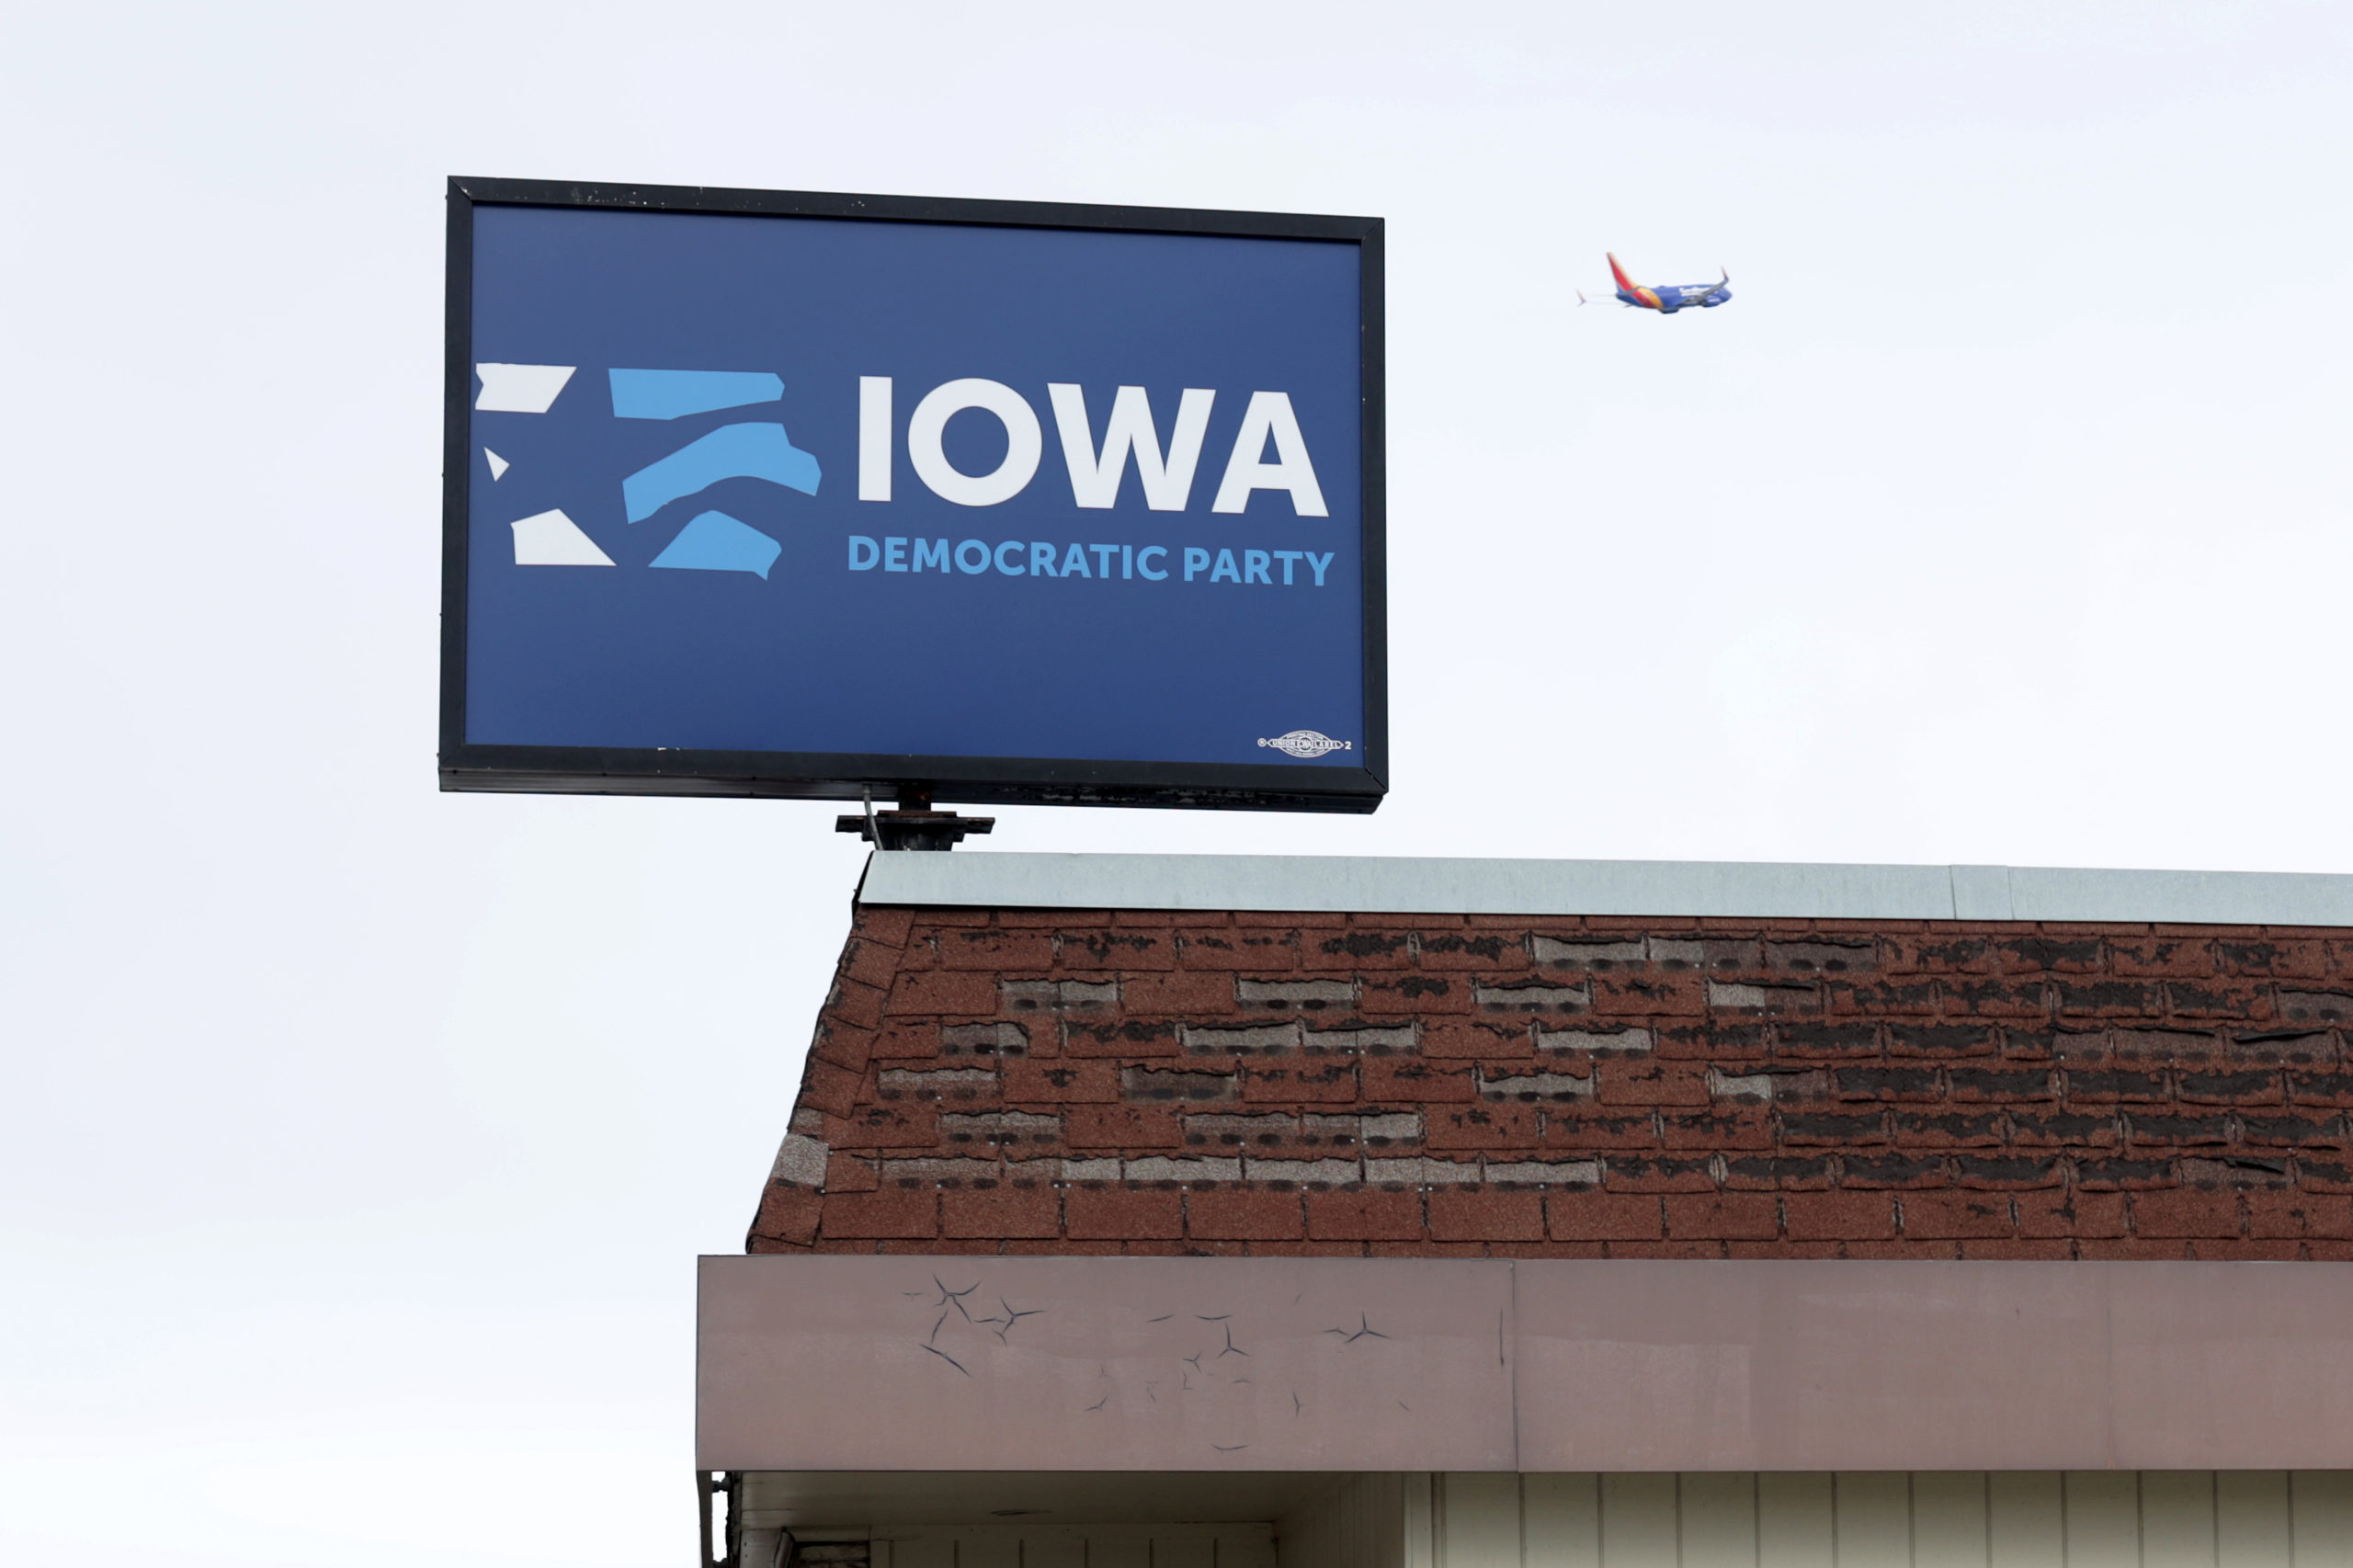 DES MOINES, IOWA - FEBRUARY 04: An exterior view of the Iowa Democratic Party headquarters is seen February 4, 2020 in Des Moines, Iowa. The announcement of the results in the Iowa presidential caucuses has been delayed after “inconsistencies” were found late Monday night relating to the app used to process the votes. The state Democratic Party said that the results will be manually verified before being released. (Photo by Alex Wong/Getty Images)